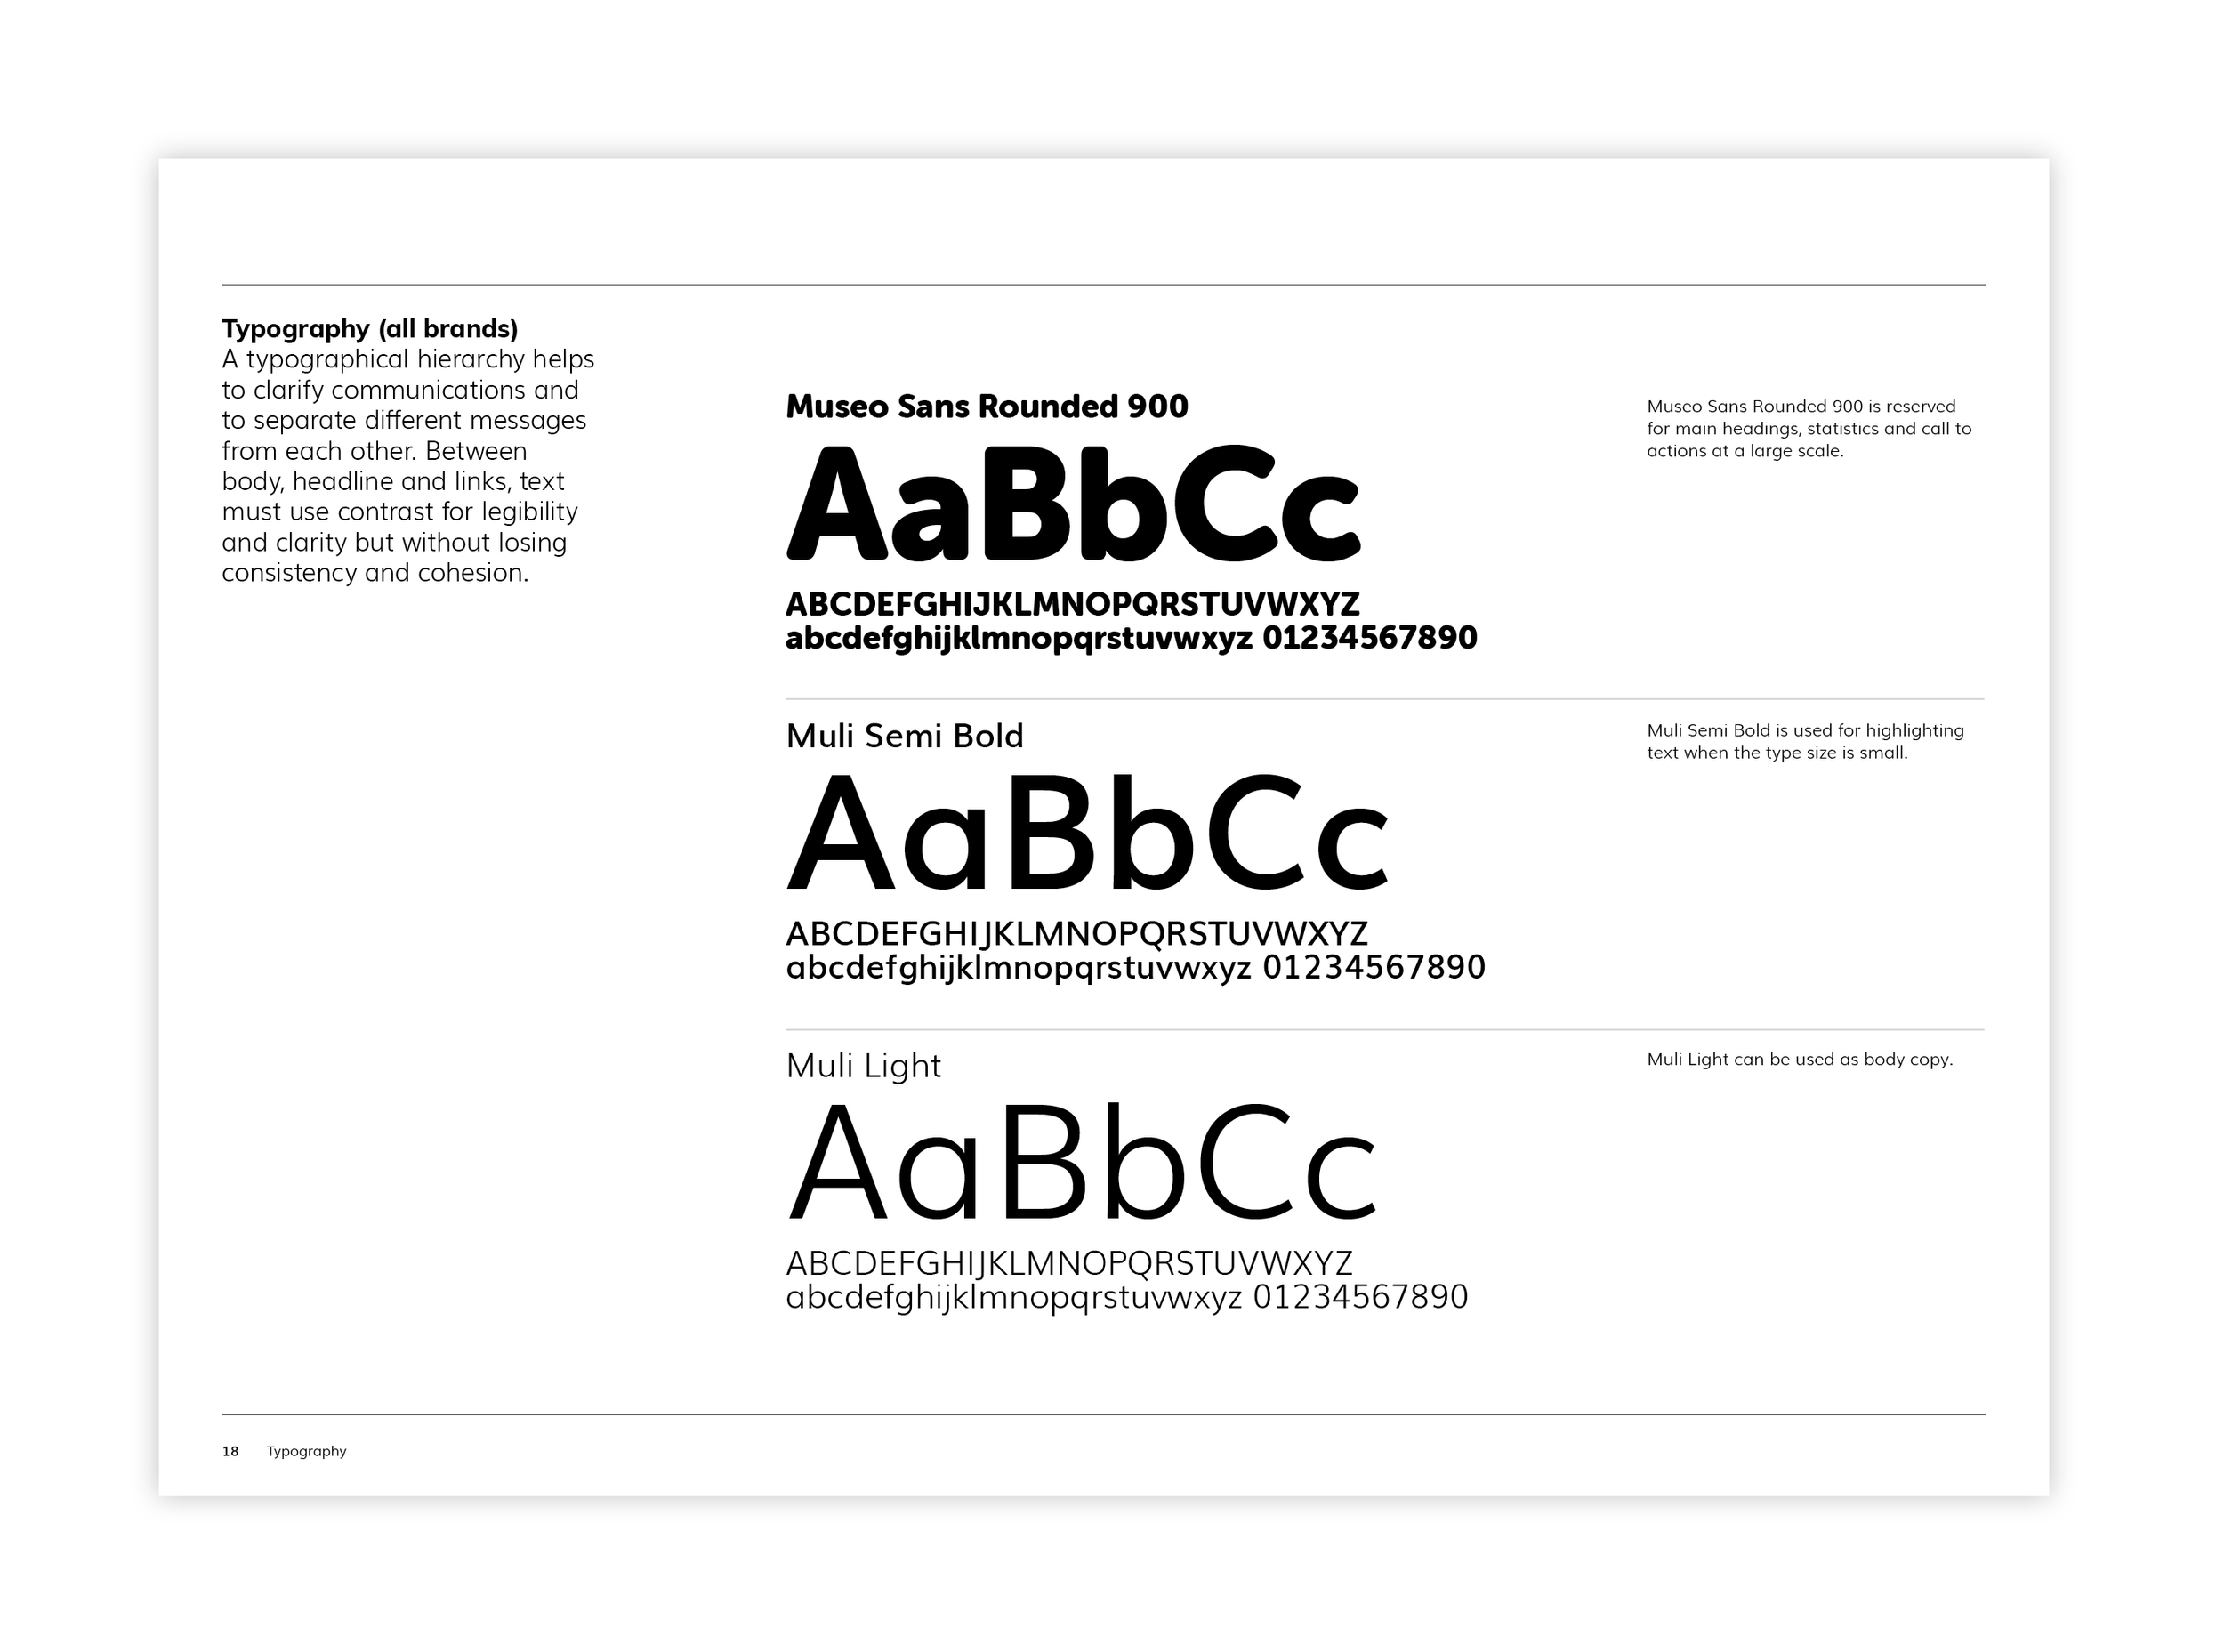 Forrest-Group-brand guidelines_4.png